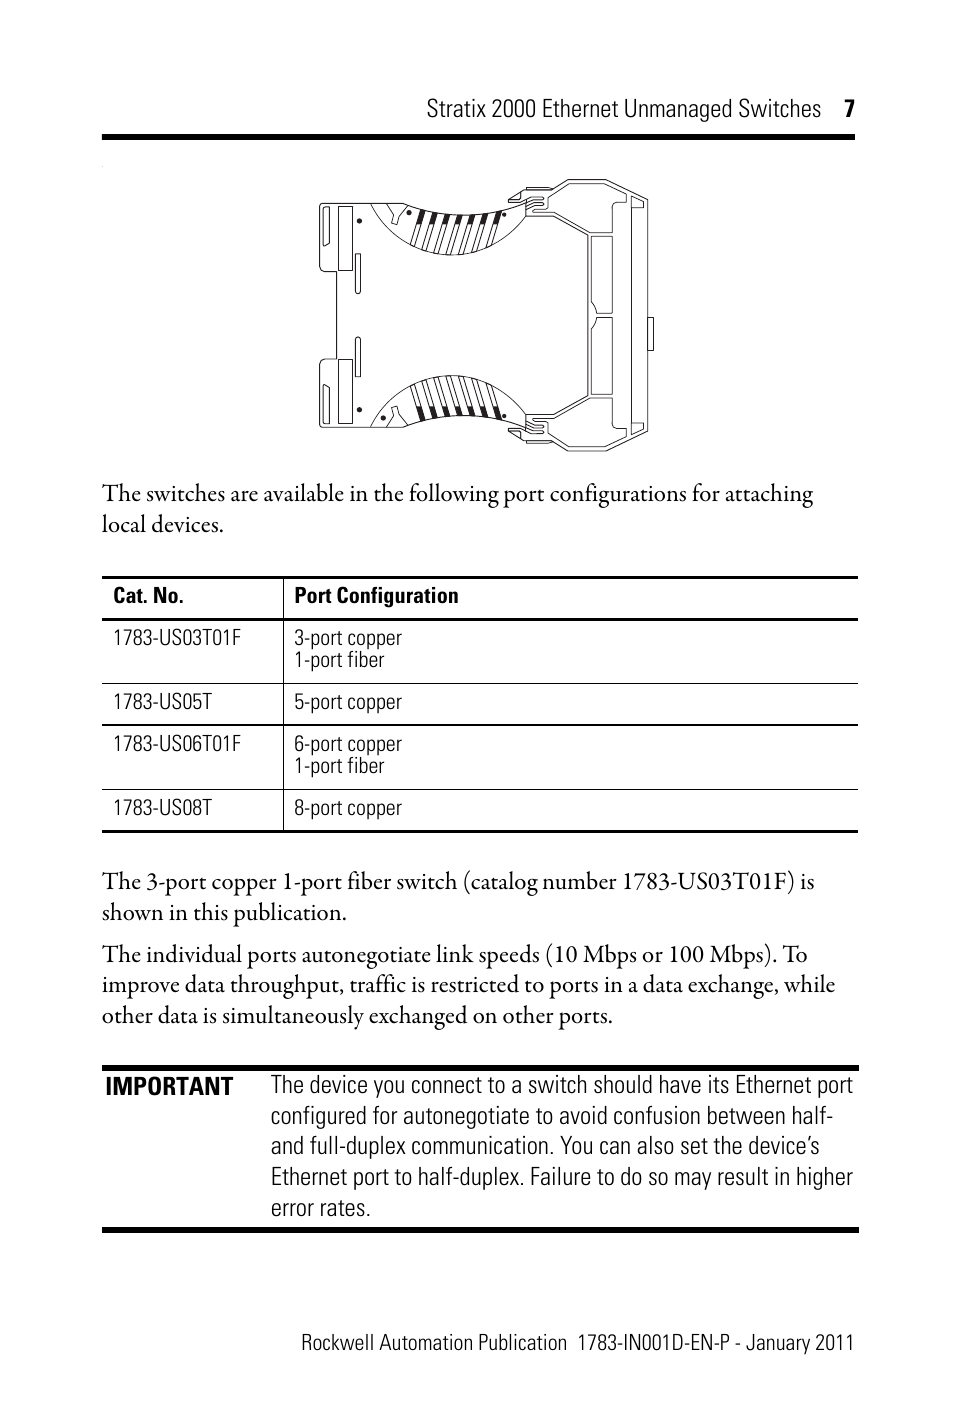 Rockwell Automation 1783-US08T Stratix 2000 Ethernet Unmanaged Switch Installation Instructions User Manual | Page 7 / 28